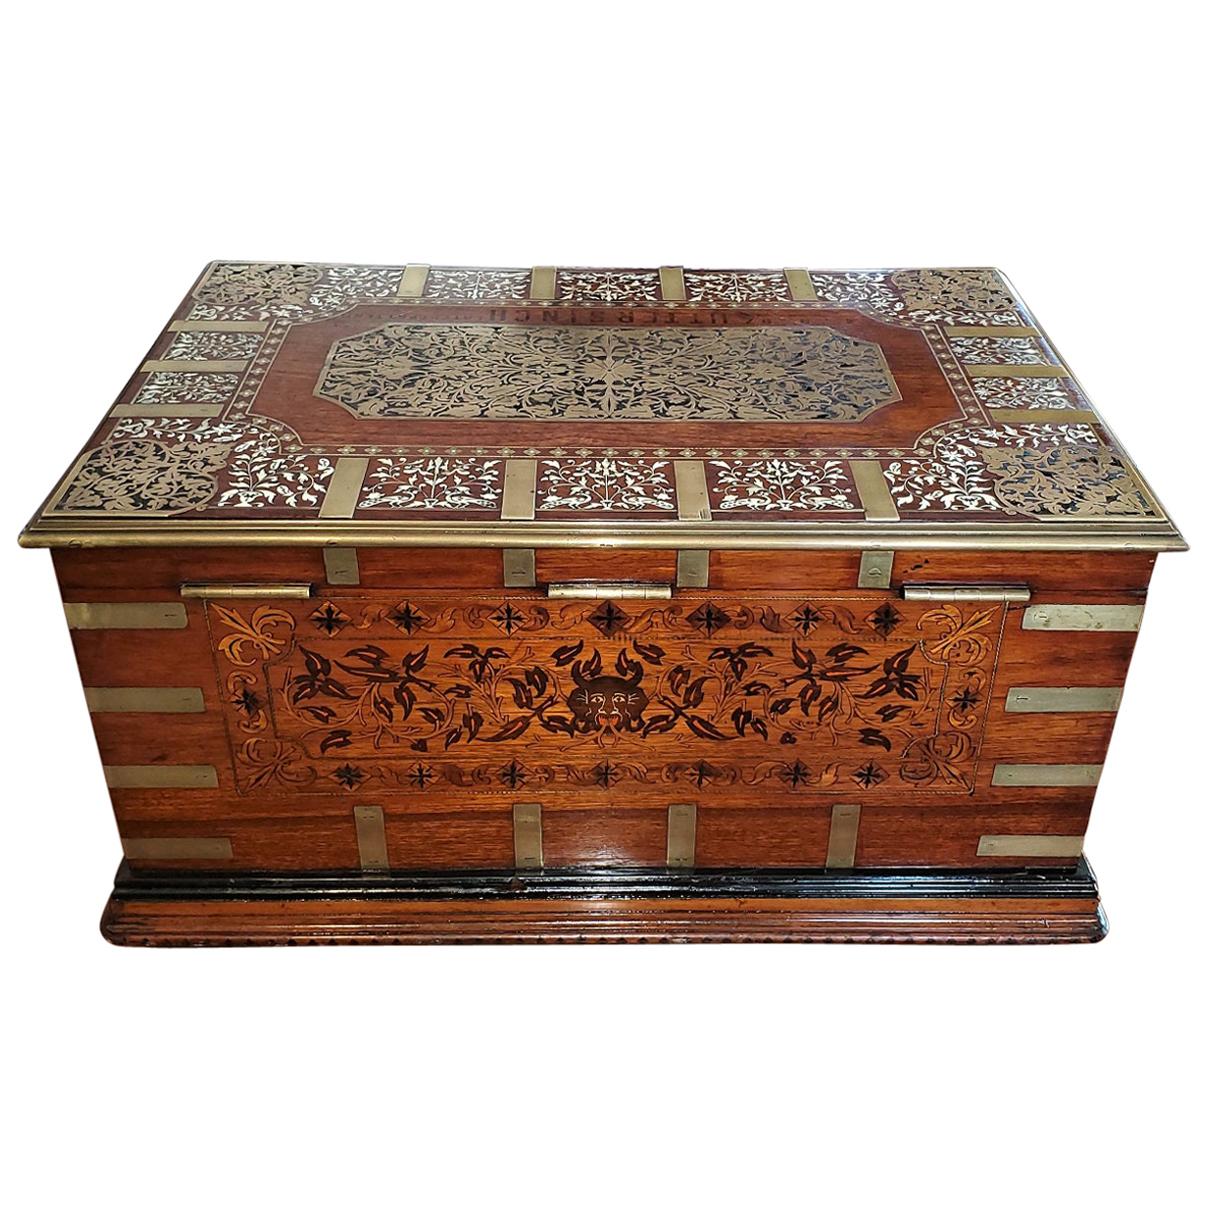 19th Century Anglo Indian Stationery Campaign Chest, Outstanding